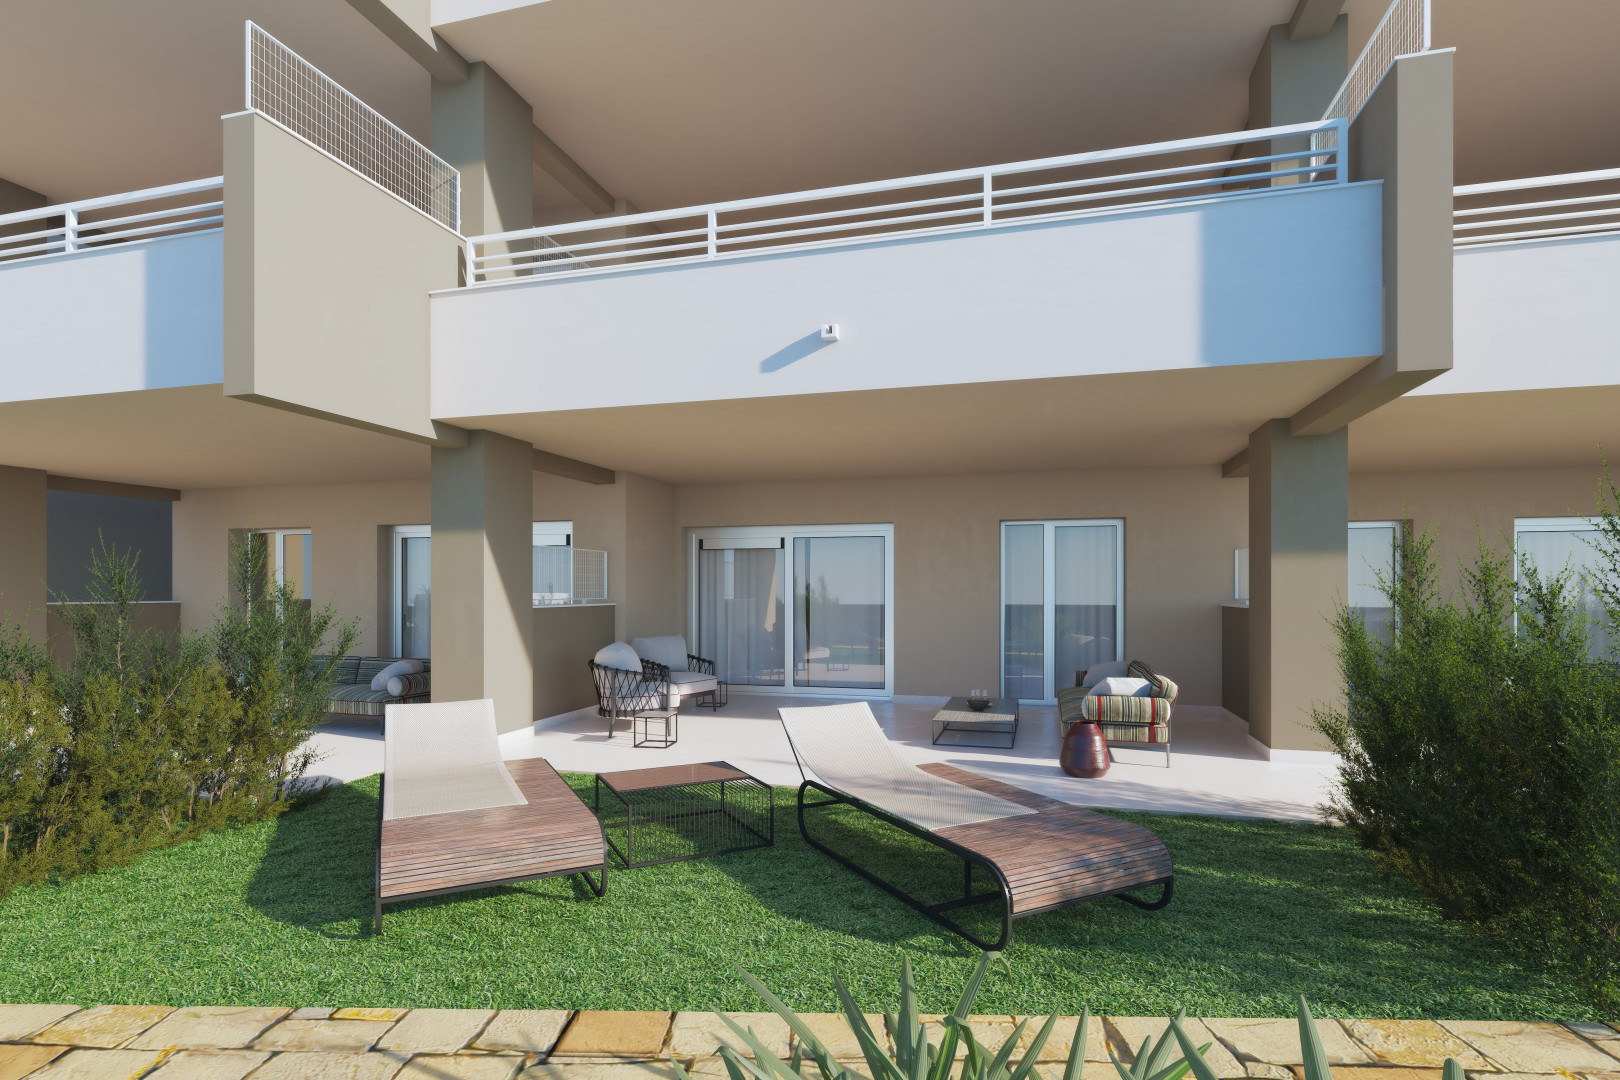 New, off-plan project of apartments and penthouses next to the golf course! PL208